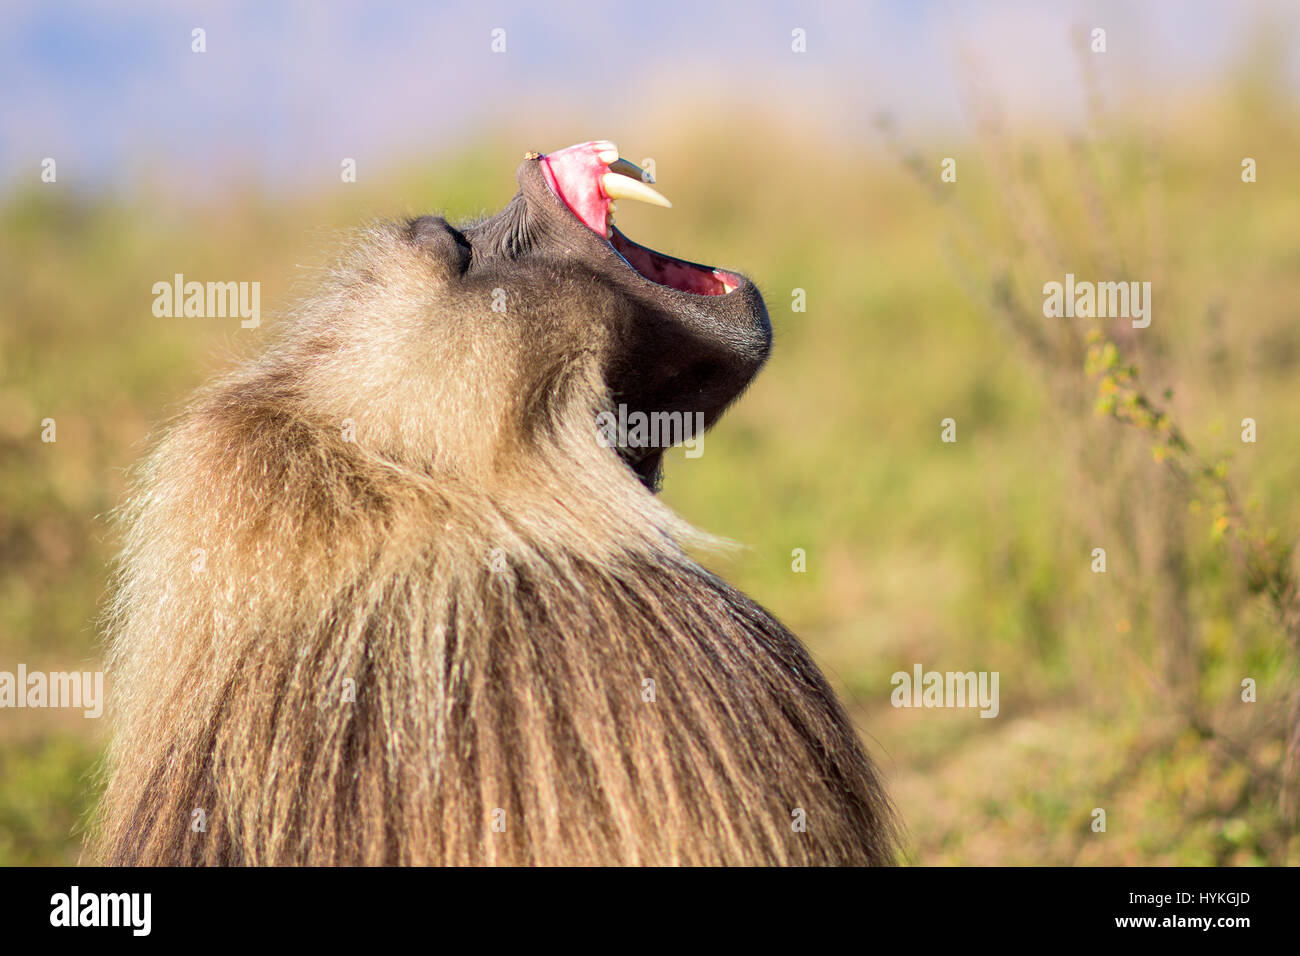 COULD these two sparring monkeys be the furriest sparring partners on the planet? Pictures show how this troop of bizarre-looking gelada monkeys fight each other for their position in the group’s pecking order. Other pictures show how they flip their lips to display their fearsome teeth and how their little offspring cling onto their mothers while the action erupts around them. Czech photographer Karel Tupy (35) took the pictures while he visited the grassy highlands of Ethopia. Stock Photo